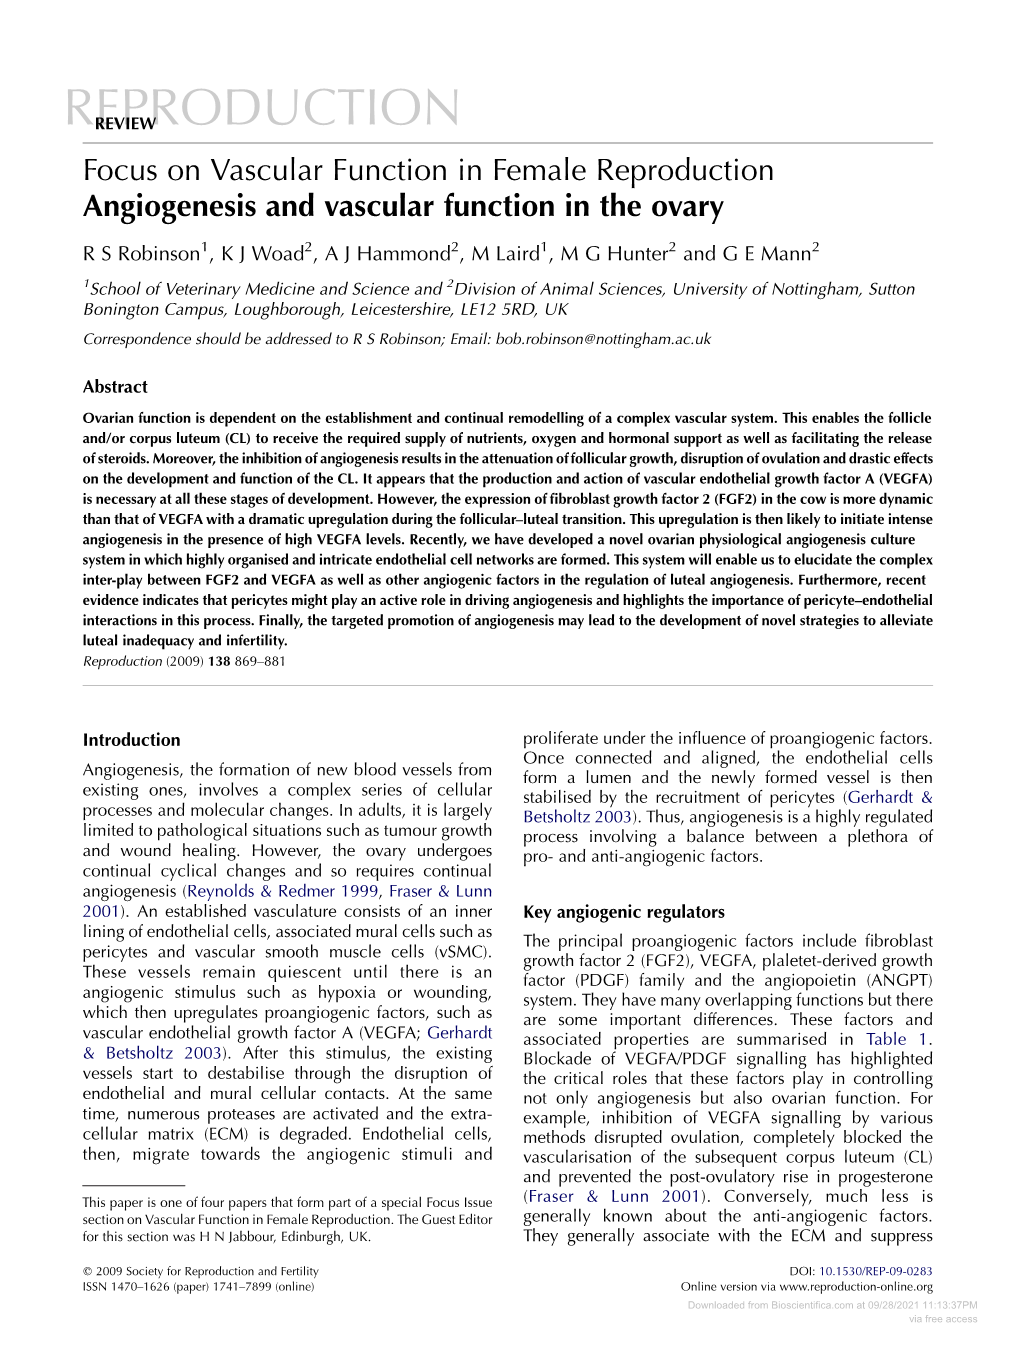 Angiogenesis and Vascular Function in the Ovary